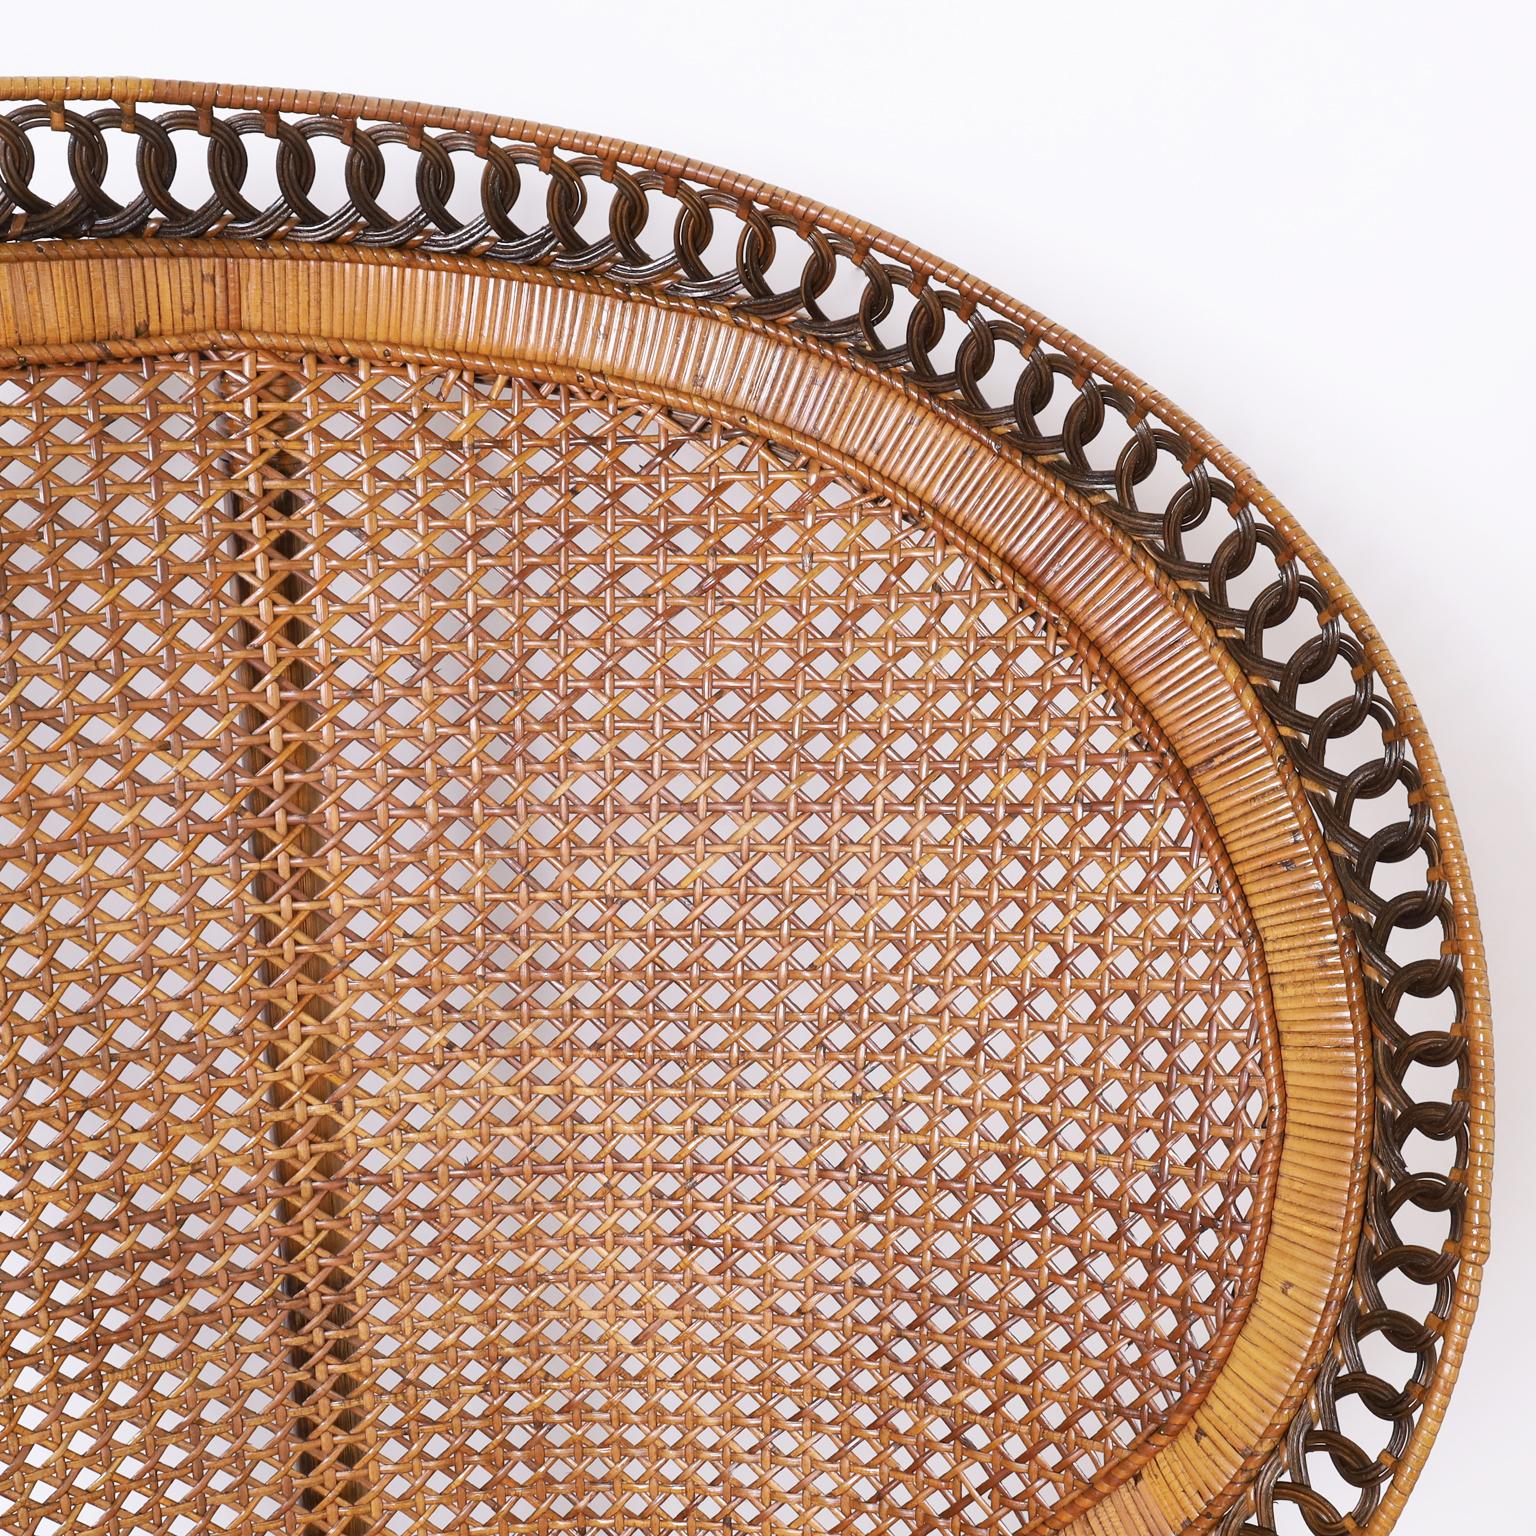 20th Century Anglo Indian Wicker and Rattan Peacock Chair